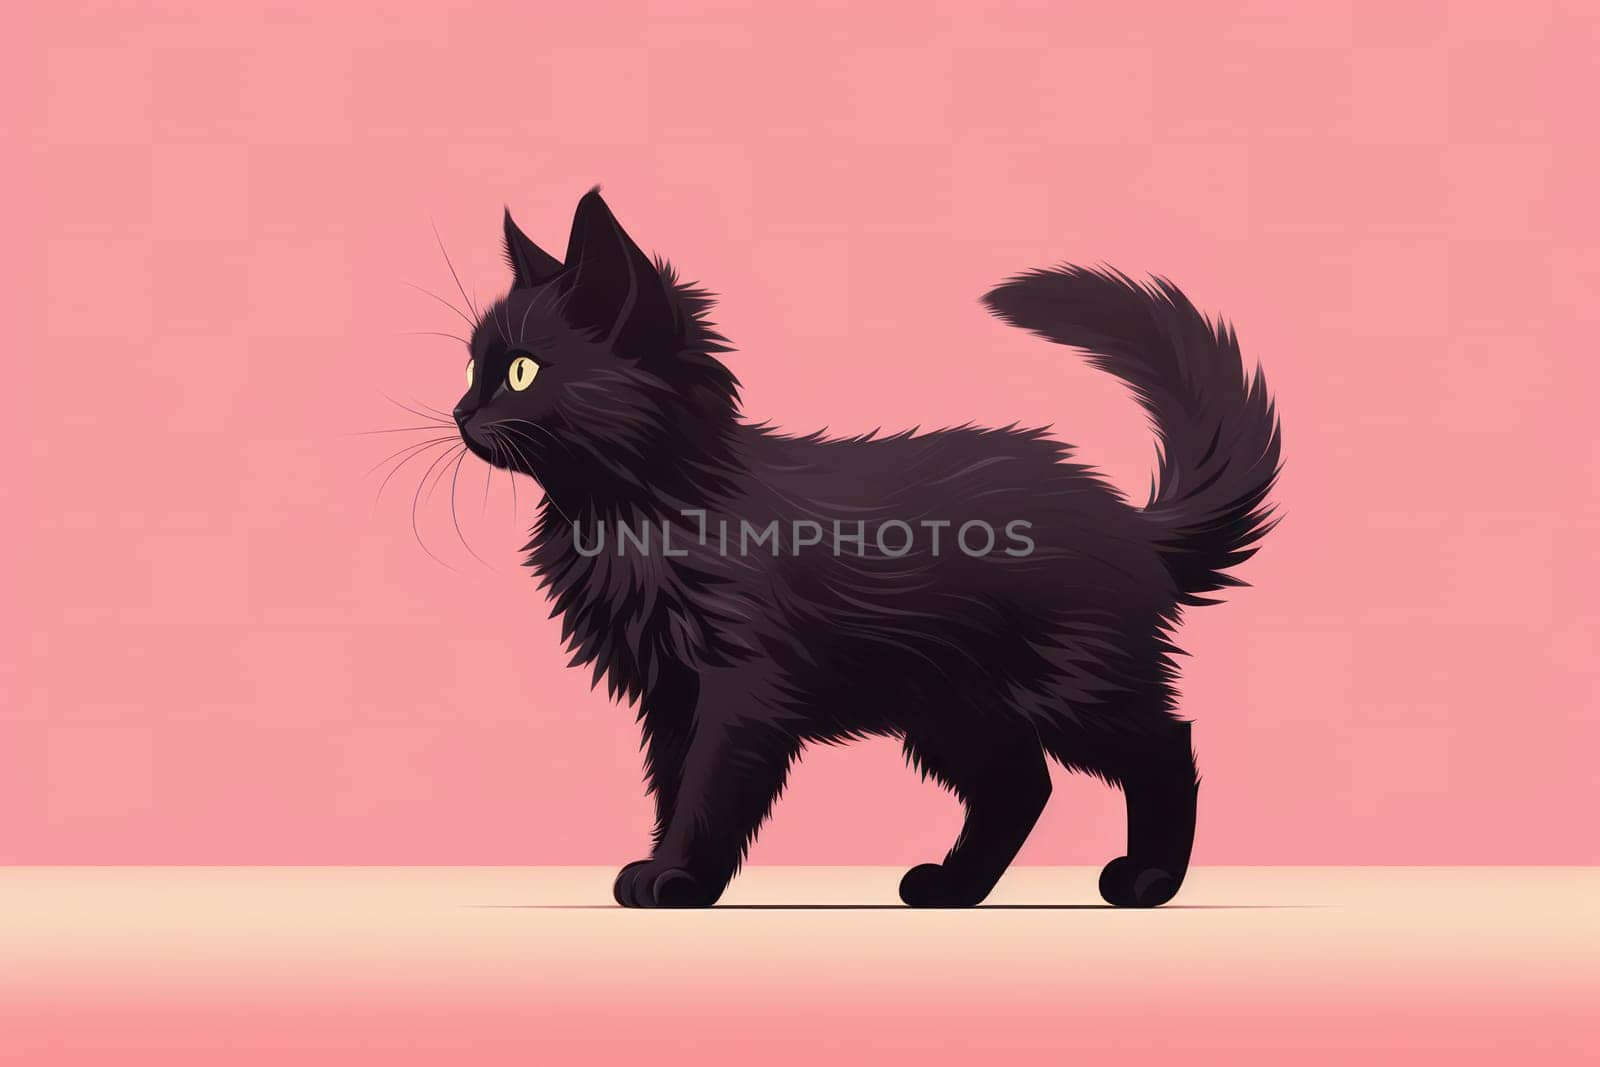 Cute and Funny Kitten with Fluffy Fur on White Studio Background